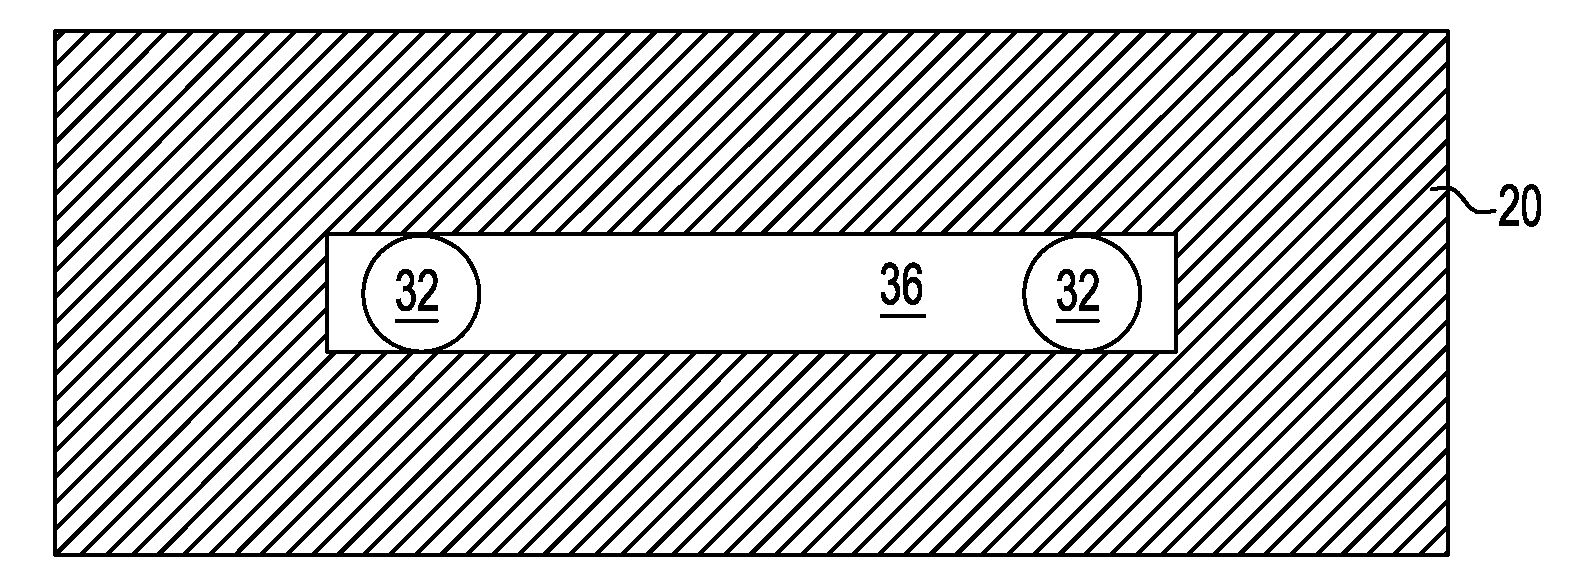 Sub-lithographic NANO interconnect structures, and method for forming same